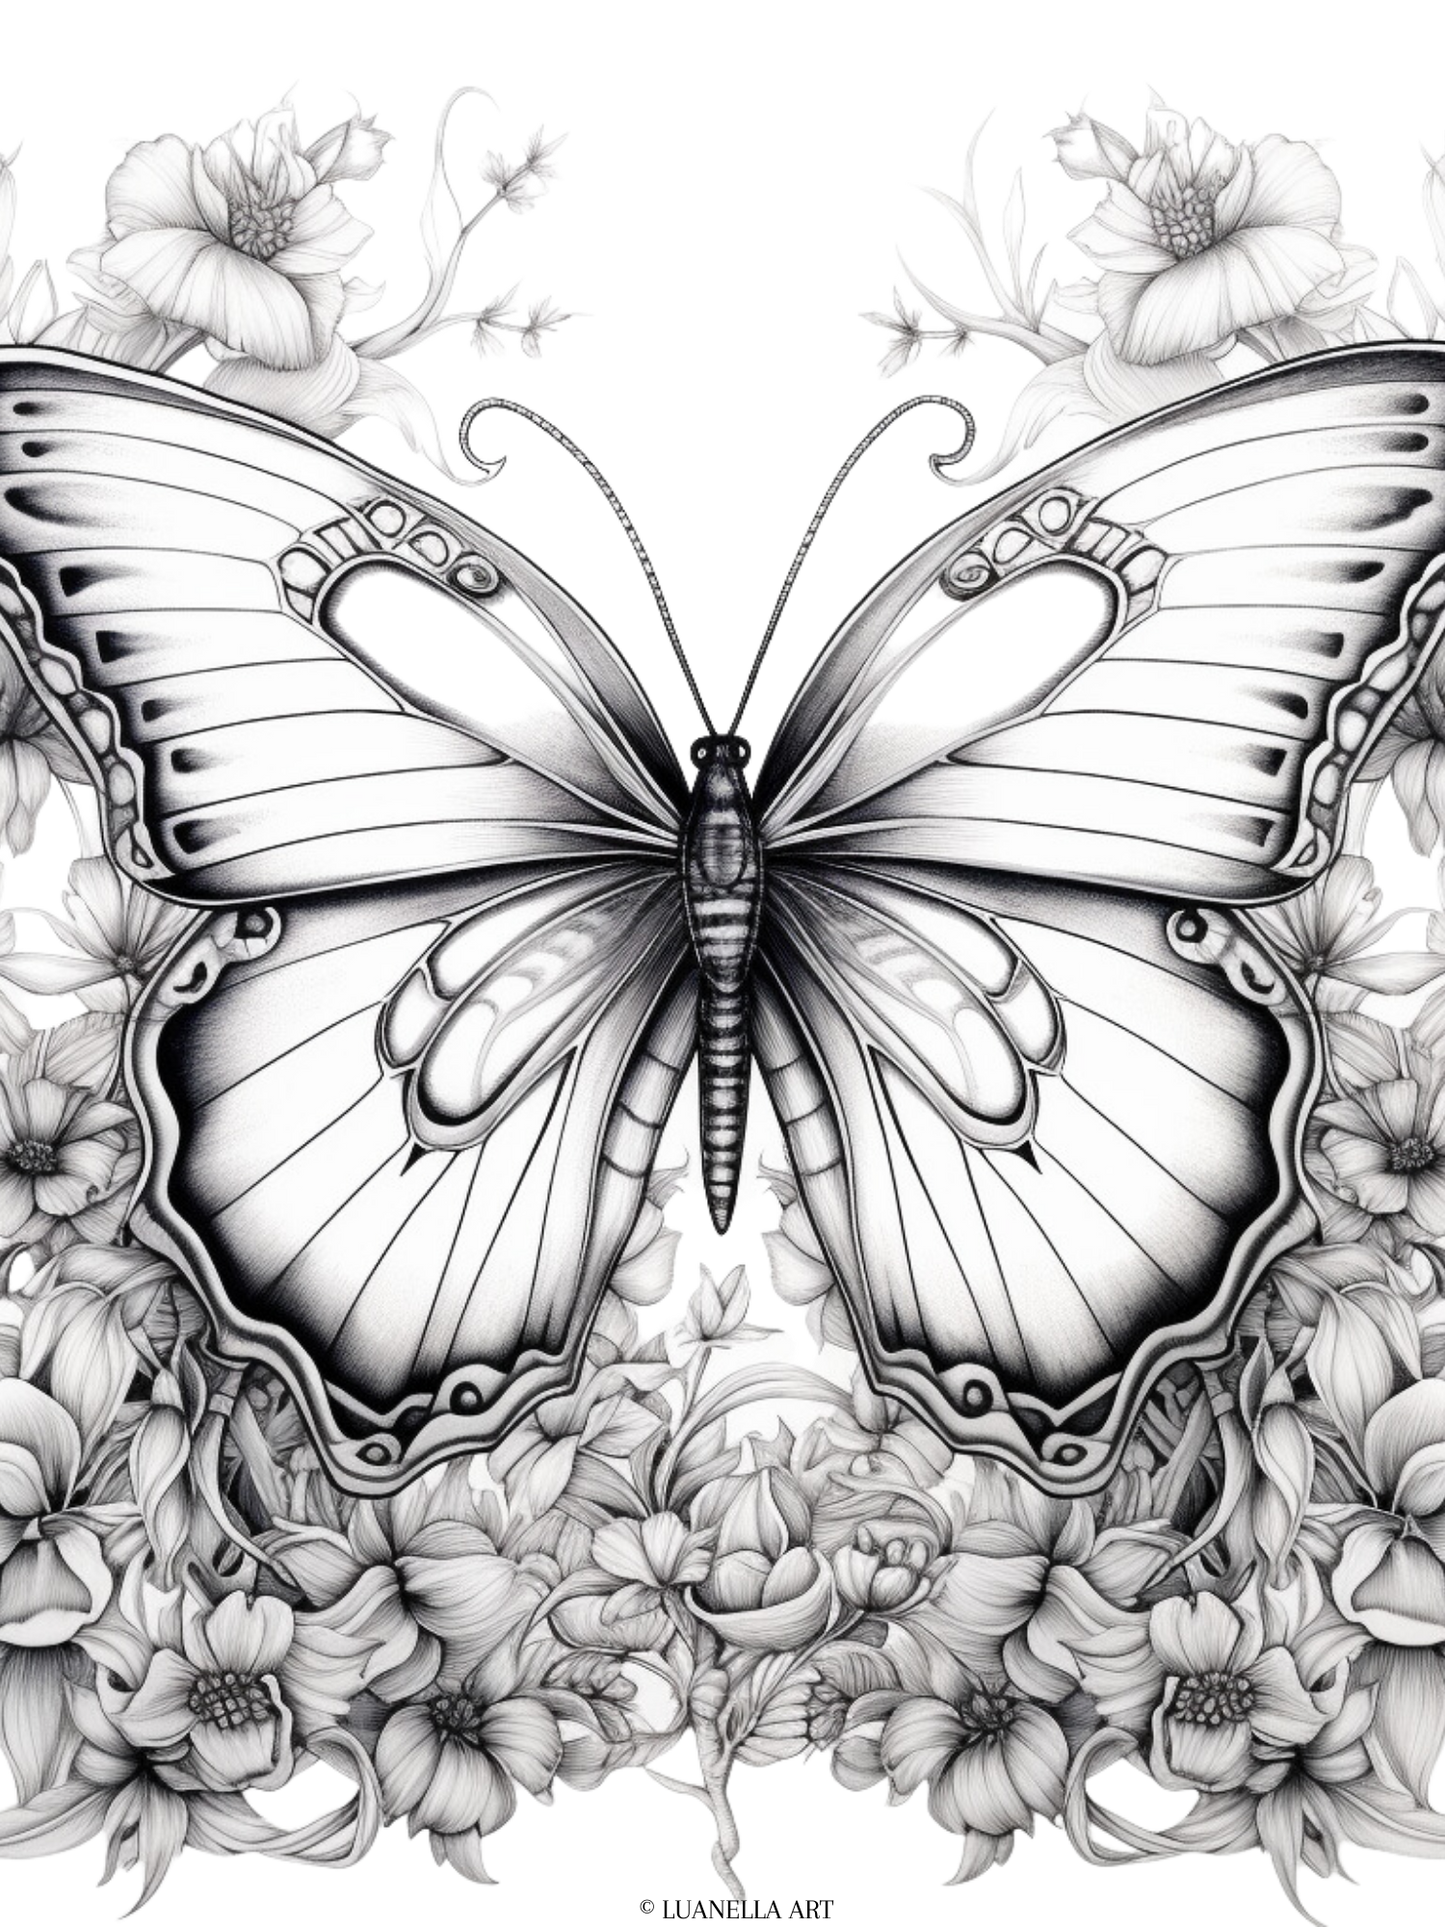 Intricate Butterfly with flower background | Coloring Page | Instant Digital Download